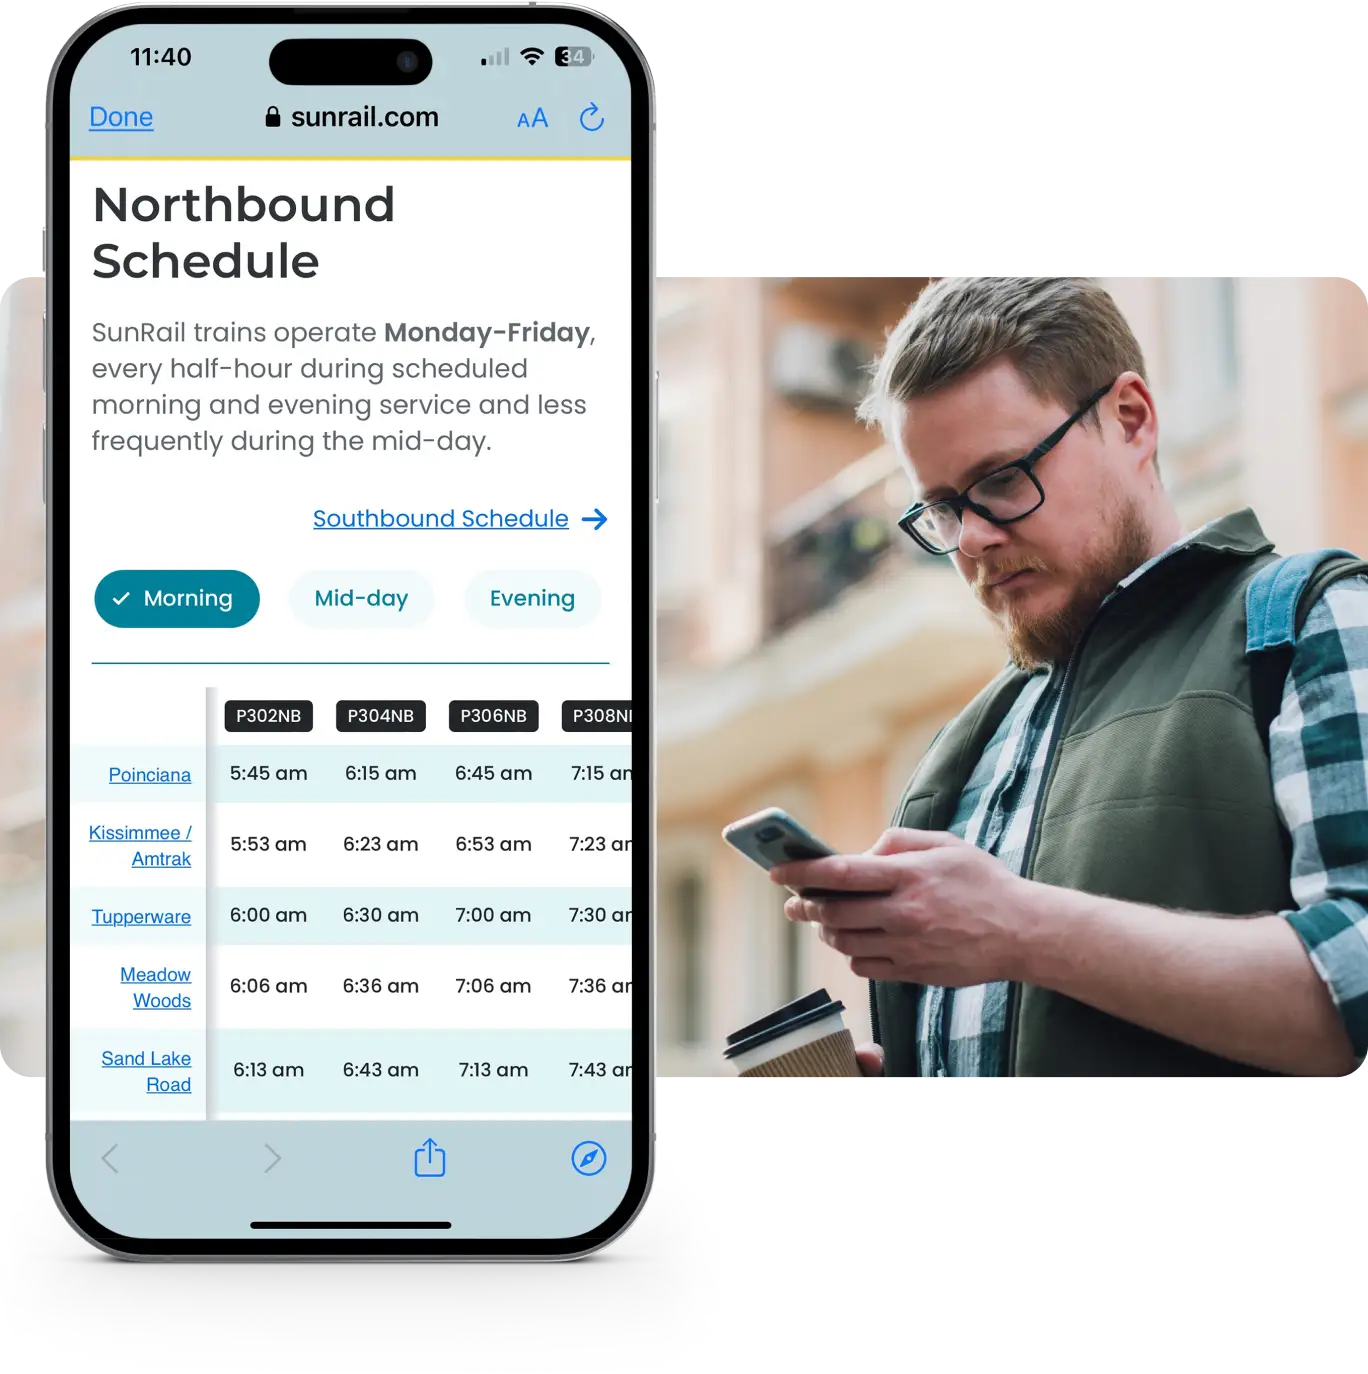 Schedule screen on top of man looking at smart phone.